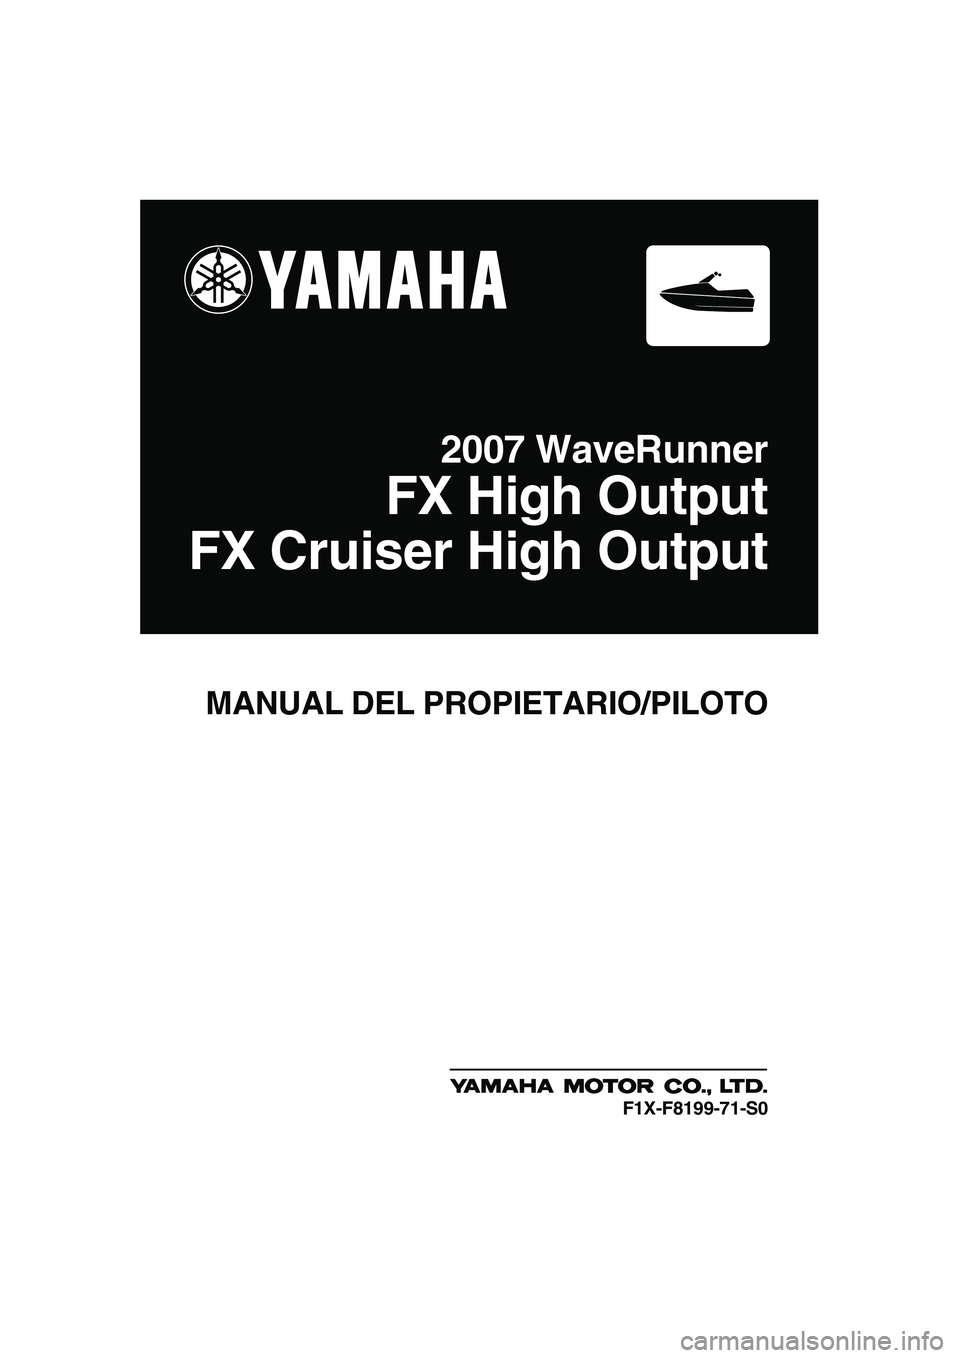 YAMAHA FX HO 2007  Manuale de Empleo (in Spanish) MANUAL DEL PROPIETARIO/PILOTO
2007 WaveRunner
FX High Output
FX Cruiser High Output
F1X-F8199-71-S0
UF1X71S0.book  Page 1  Wednesday, September 27, 2006  1:14 PM 